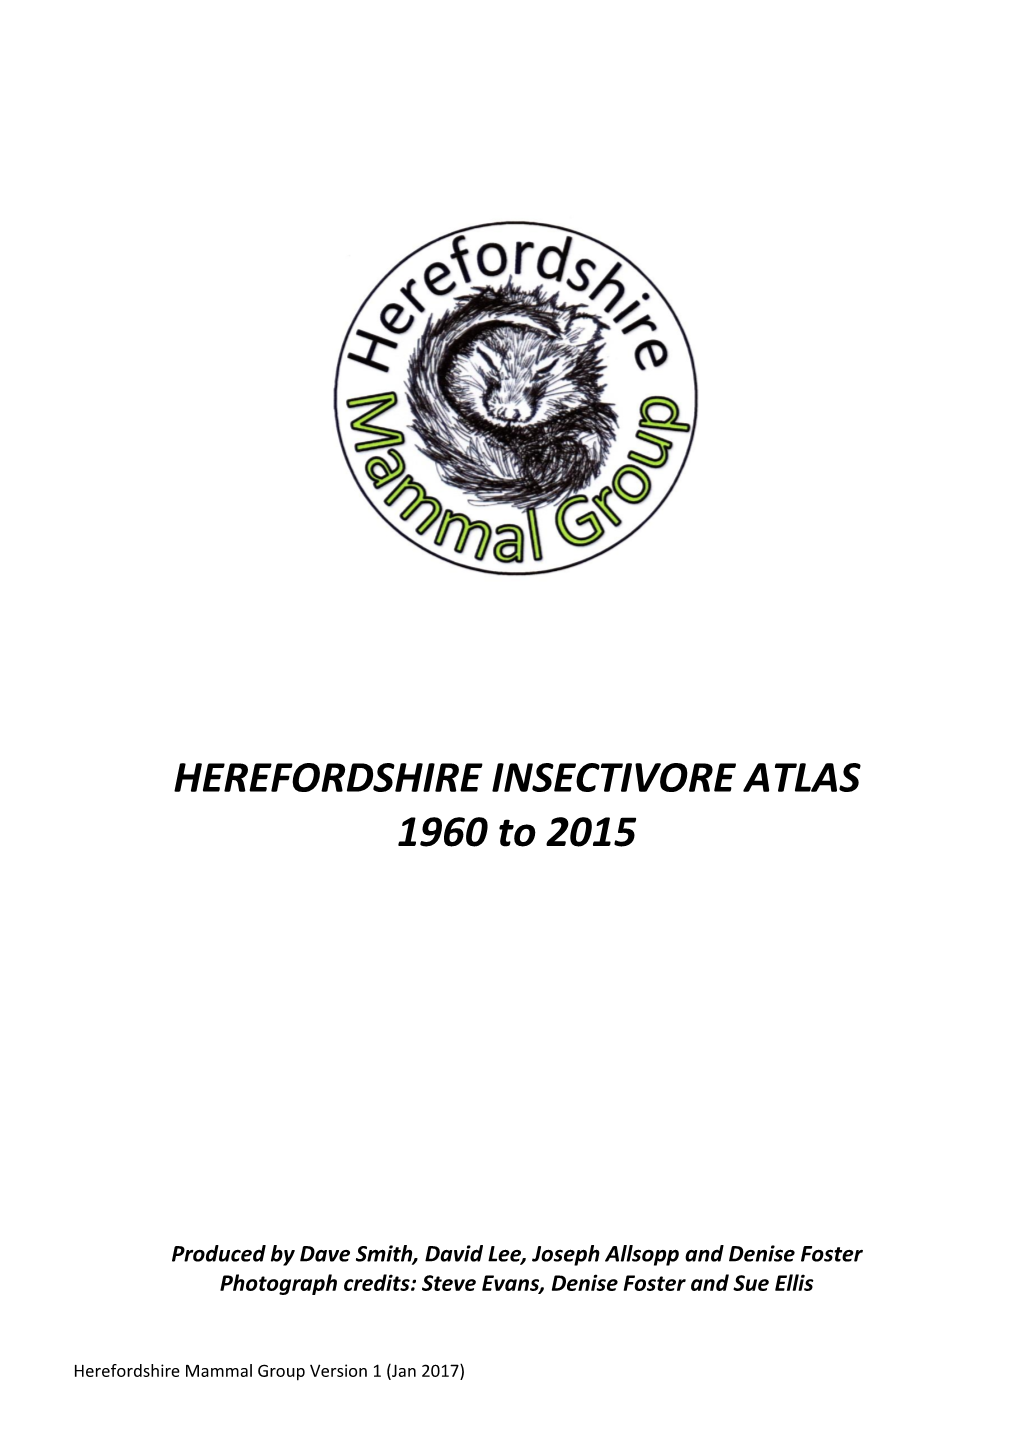 HEREFORDSHIRE INSECTIVORE ATLAS 1960 to 2015